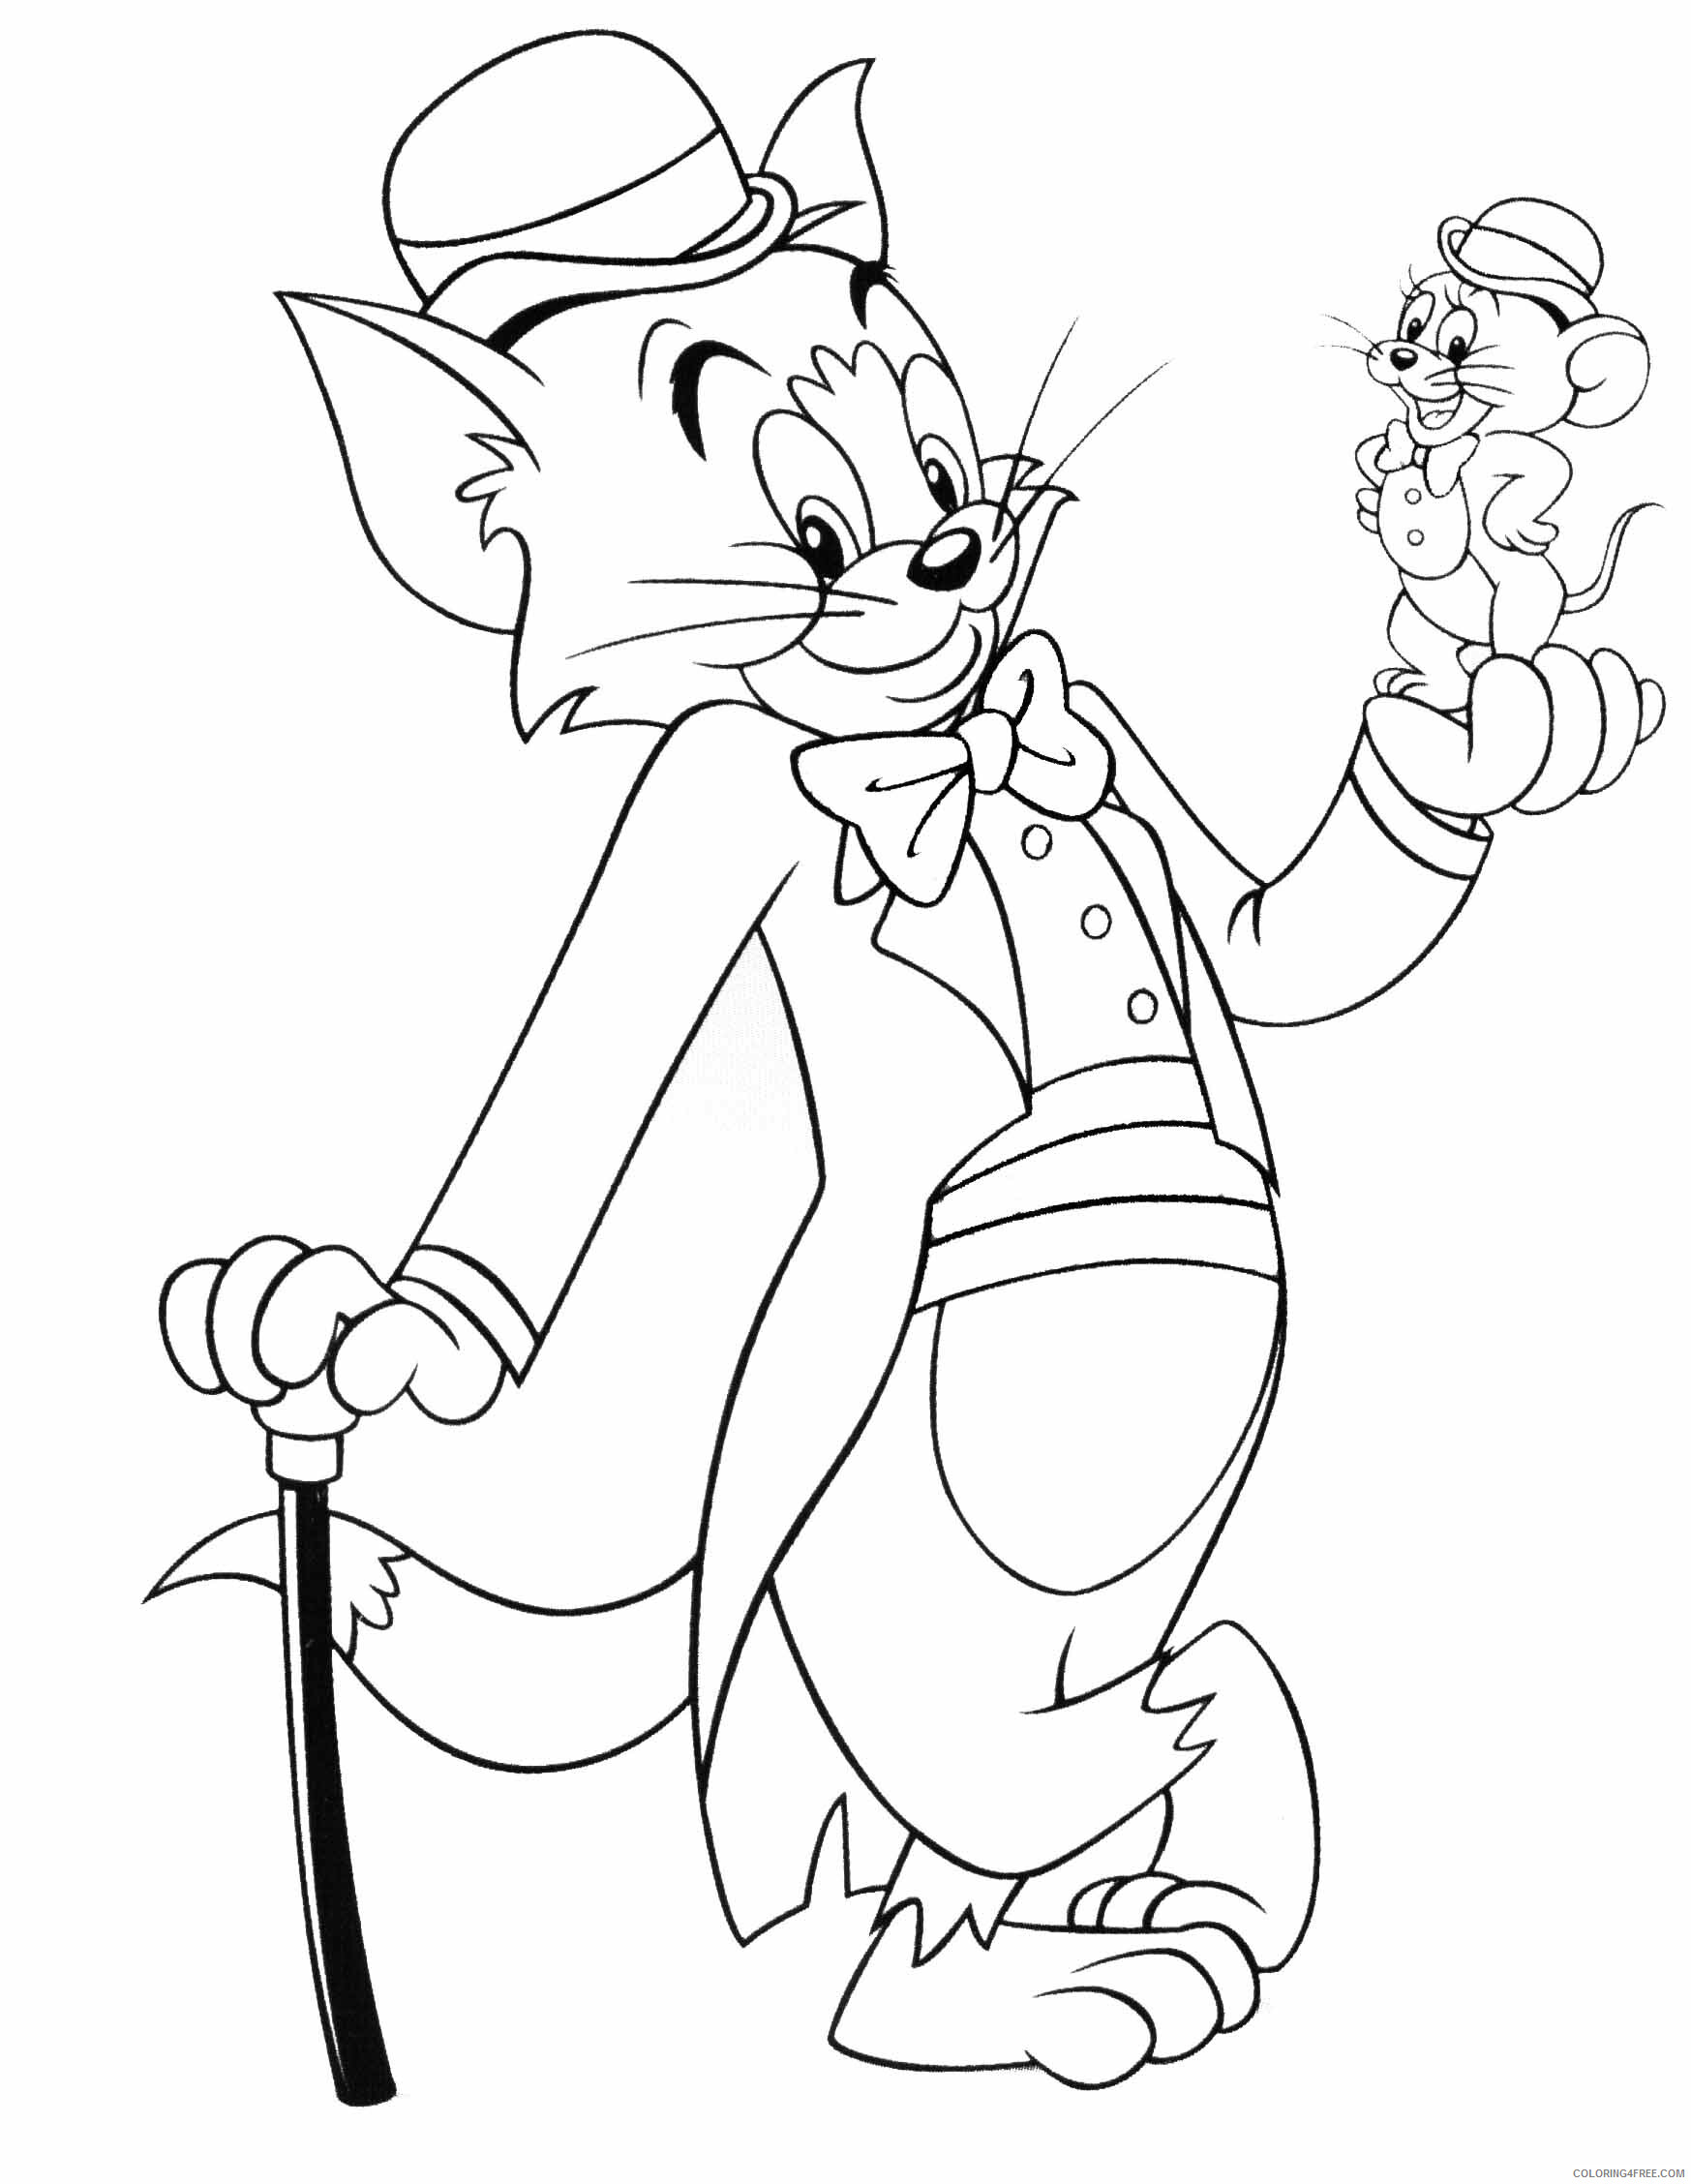 Tom and Jerry Coloring Pages TV Film of Tom and Jerry Printable 2020 10103 Coloring4free